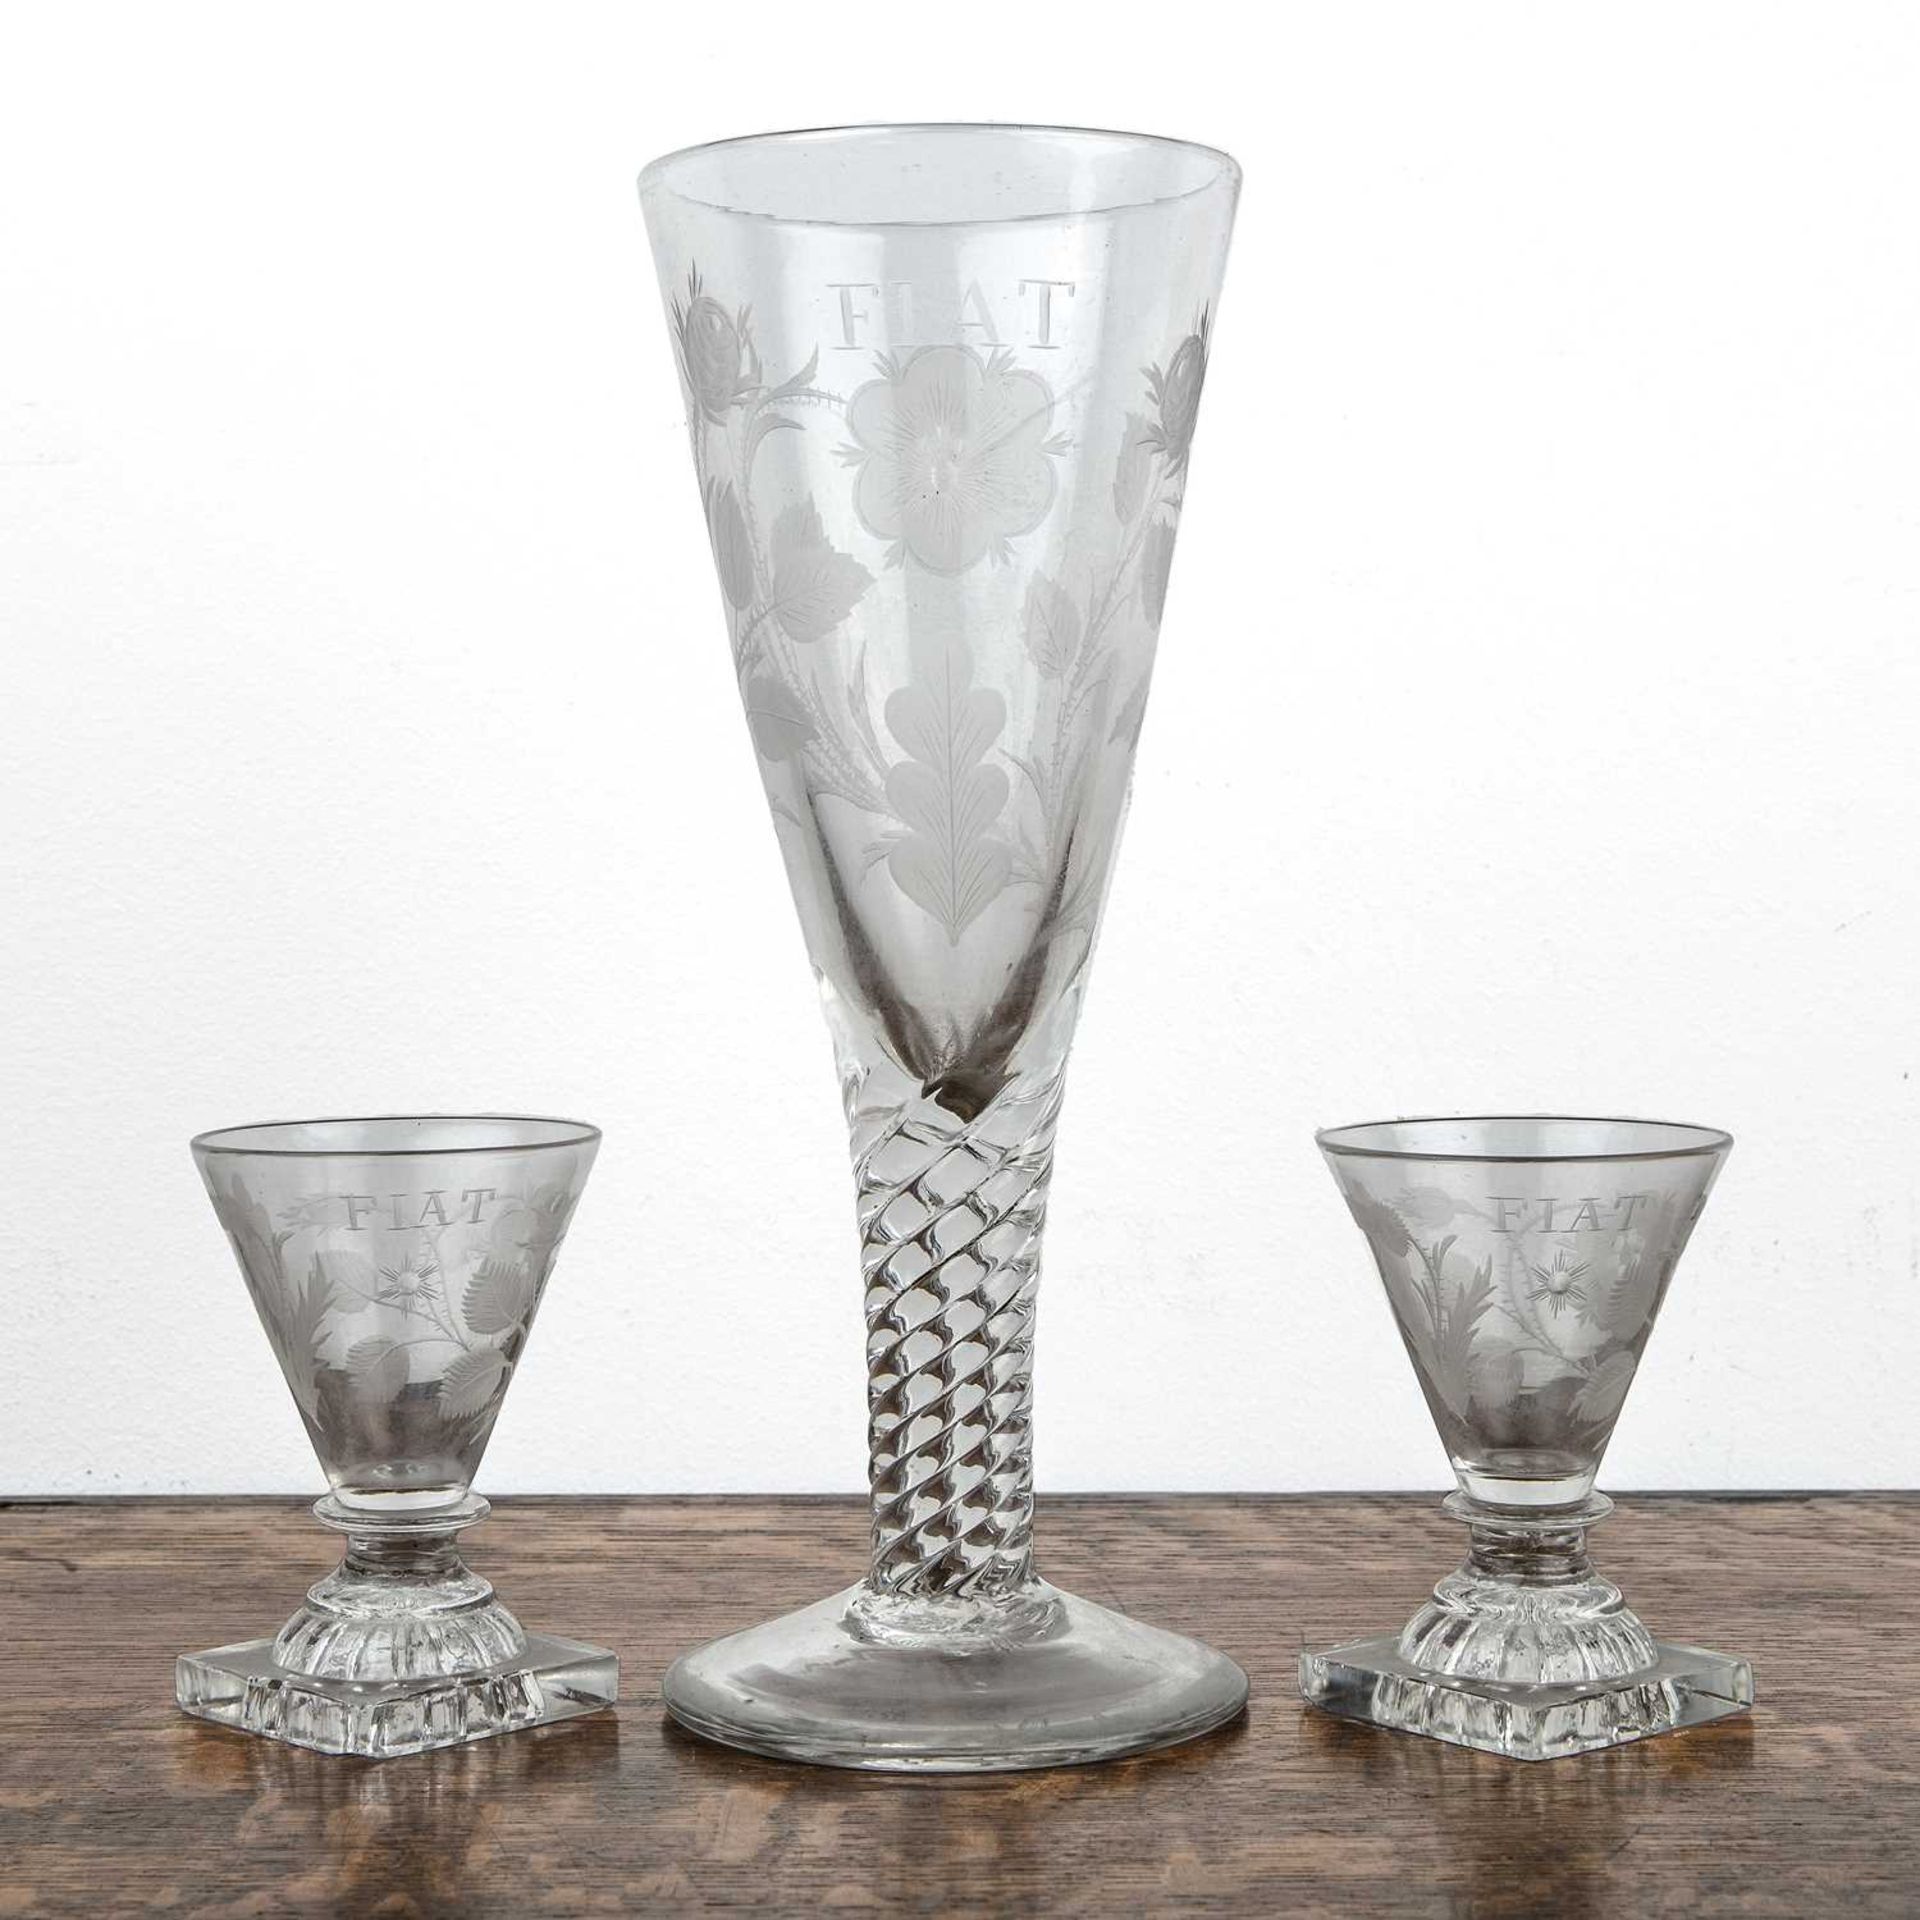 Jacobite revival 'Fiat' glass of trumpet form, engraved with Fiat above a star and oakleaf, 27cm